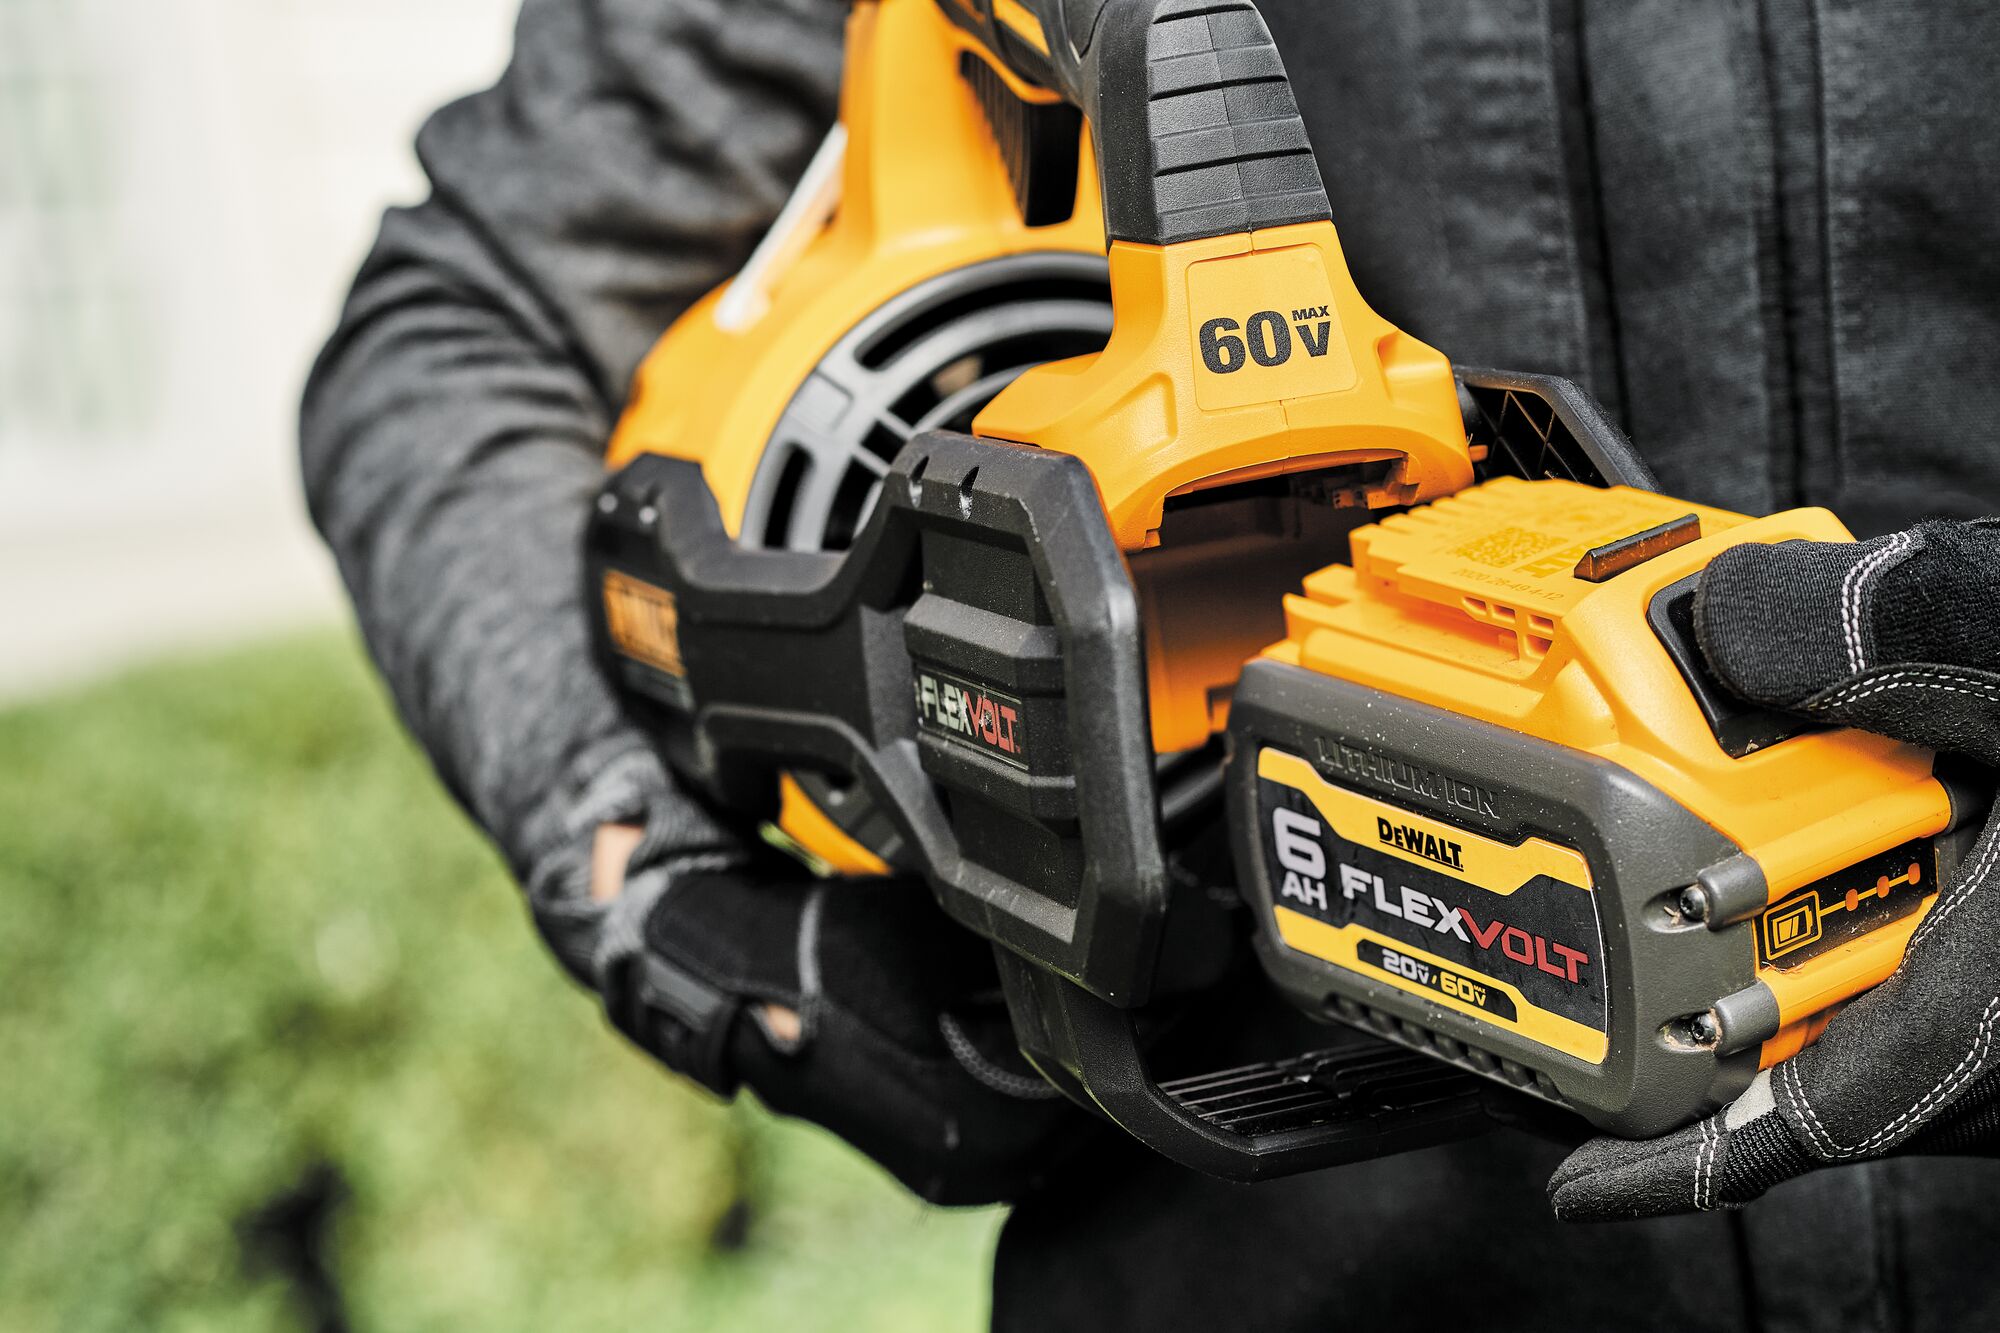 60 volts MAX* 6 AMP hours removable, backwards compatible battery feature of  FLEXVOLT Brushless Cordless Handheld Axial Blower